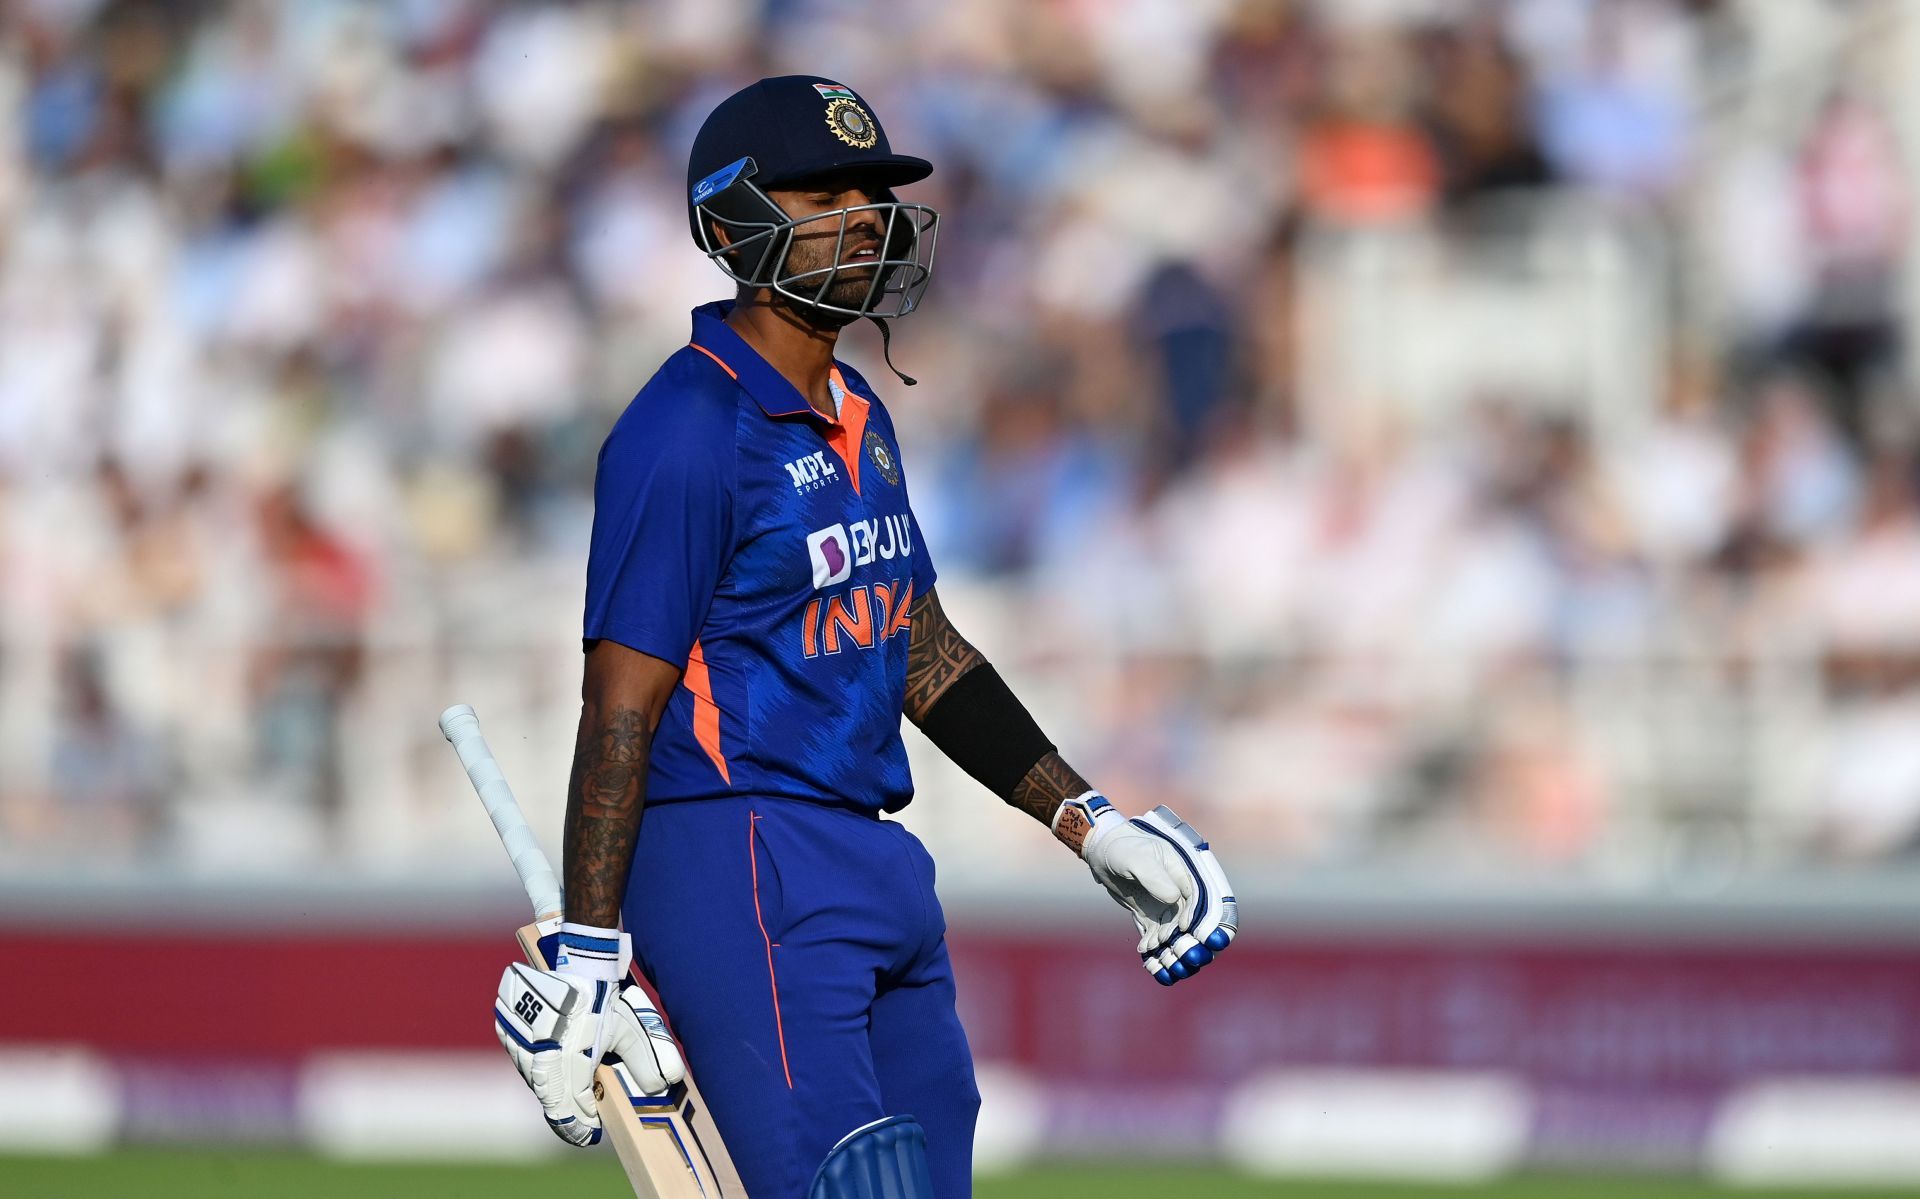 Suryakumar Yadav was dismissed for 11 in the second T20I against the West Indies